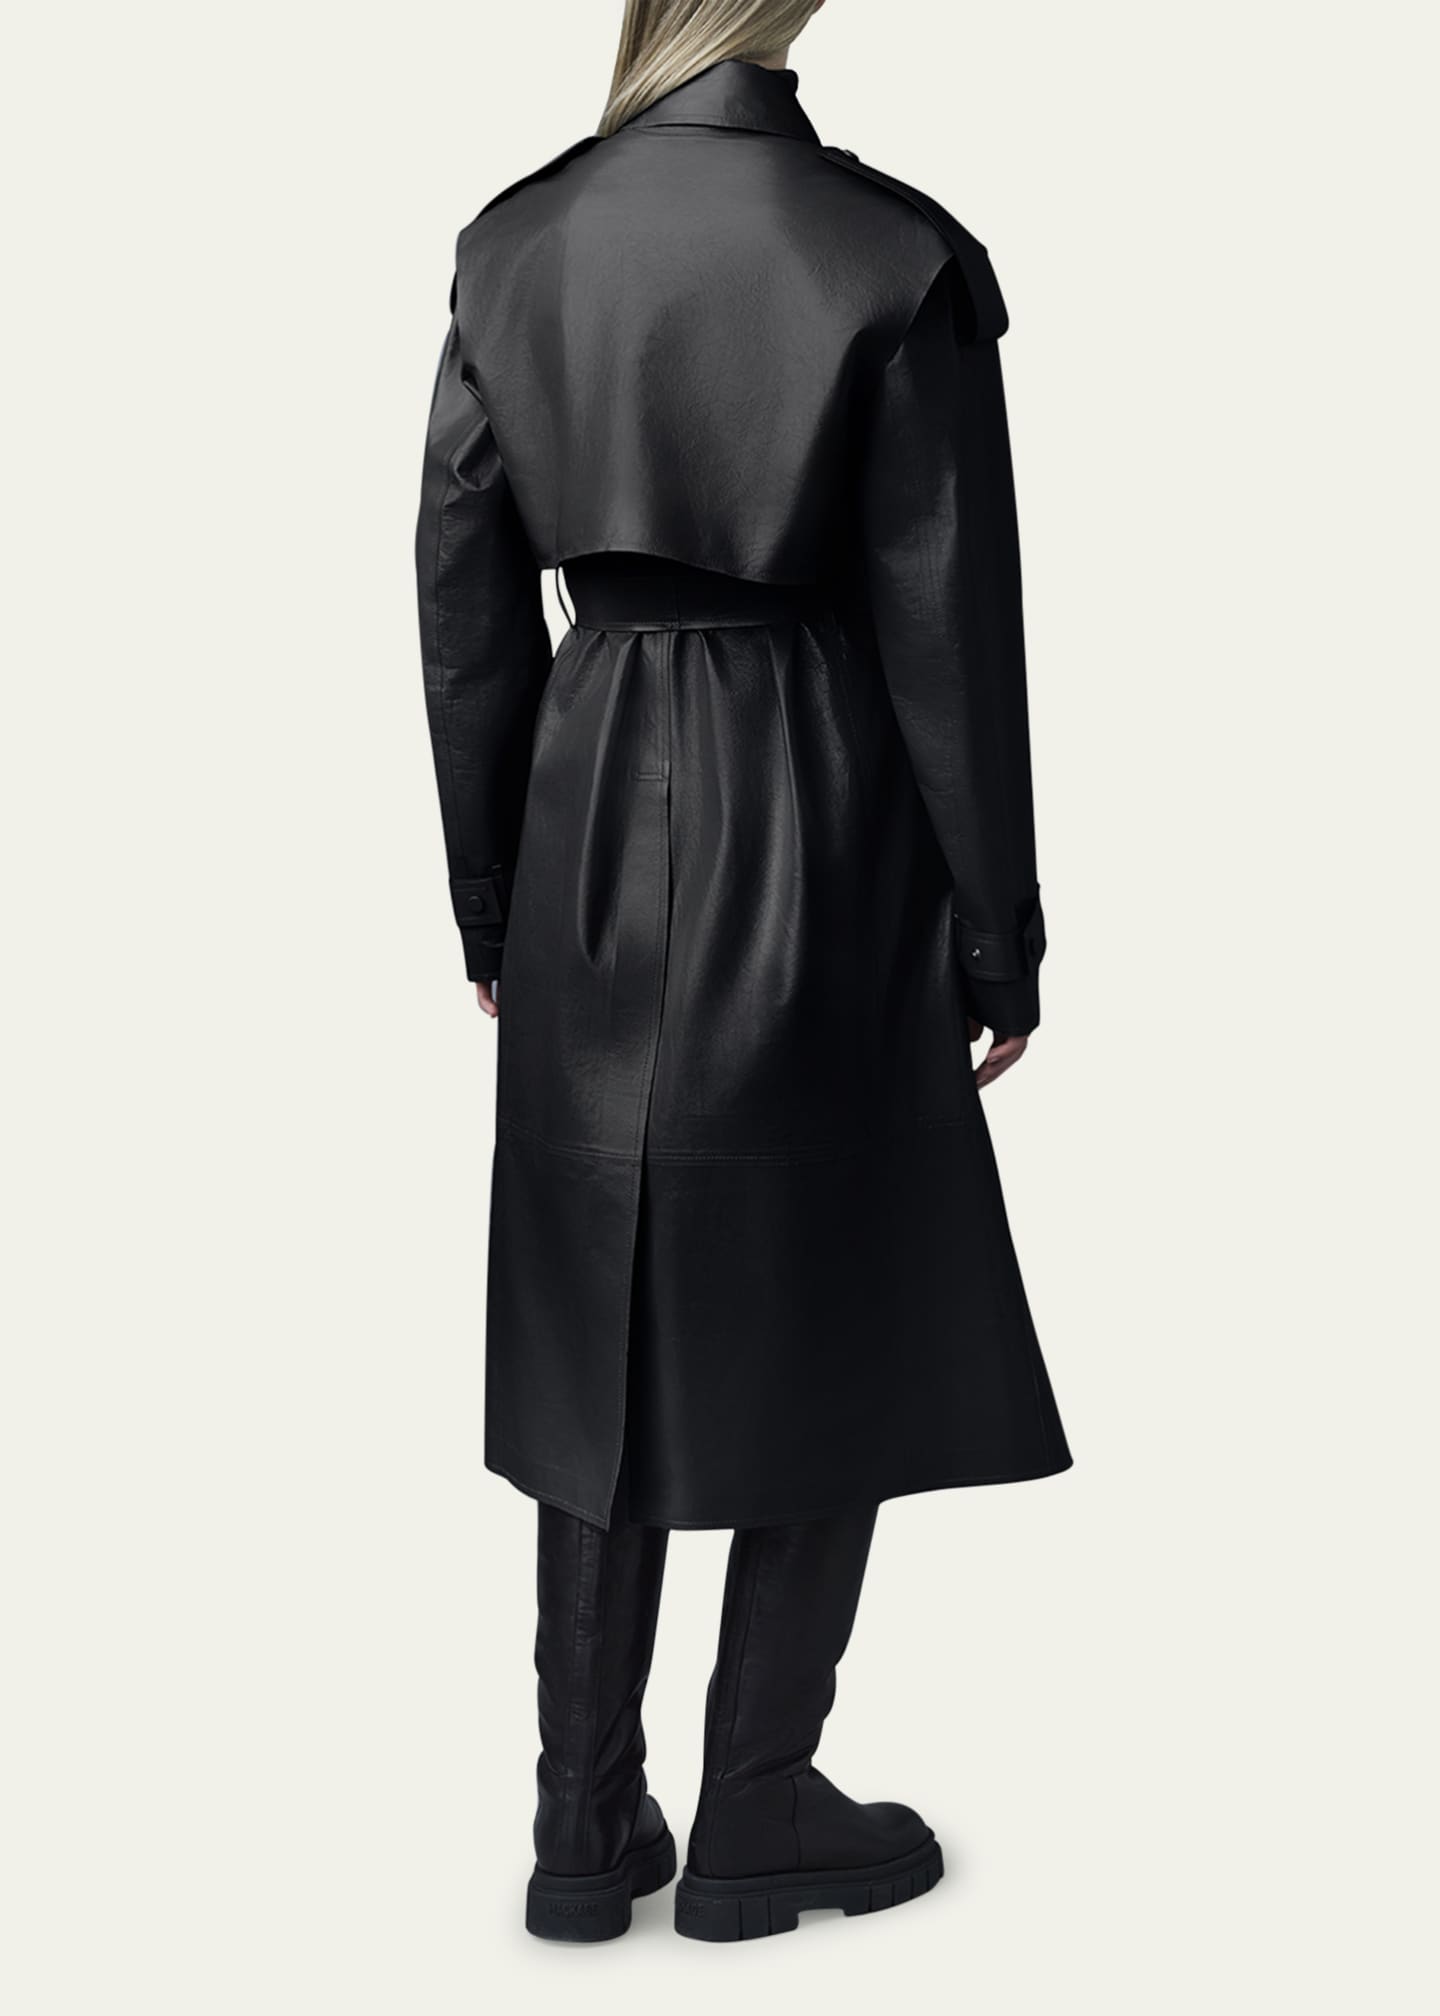 Mackage Adriana Belted Leather Trench Coat - Bergdorf Goodman